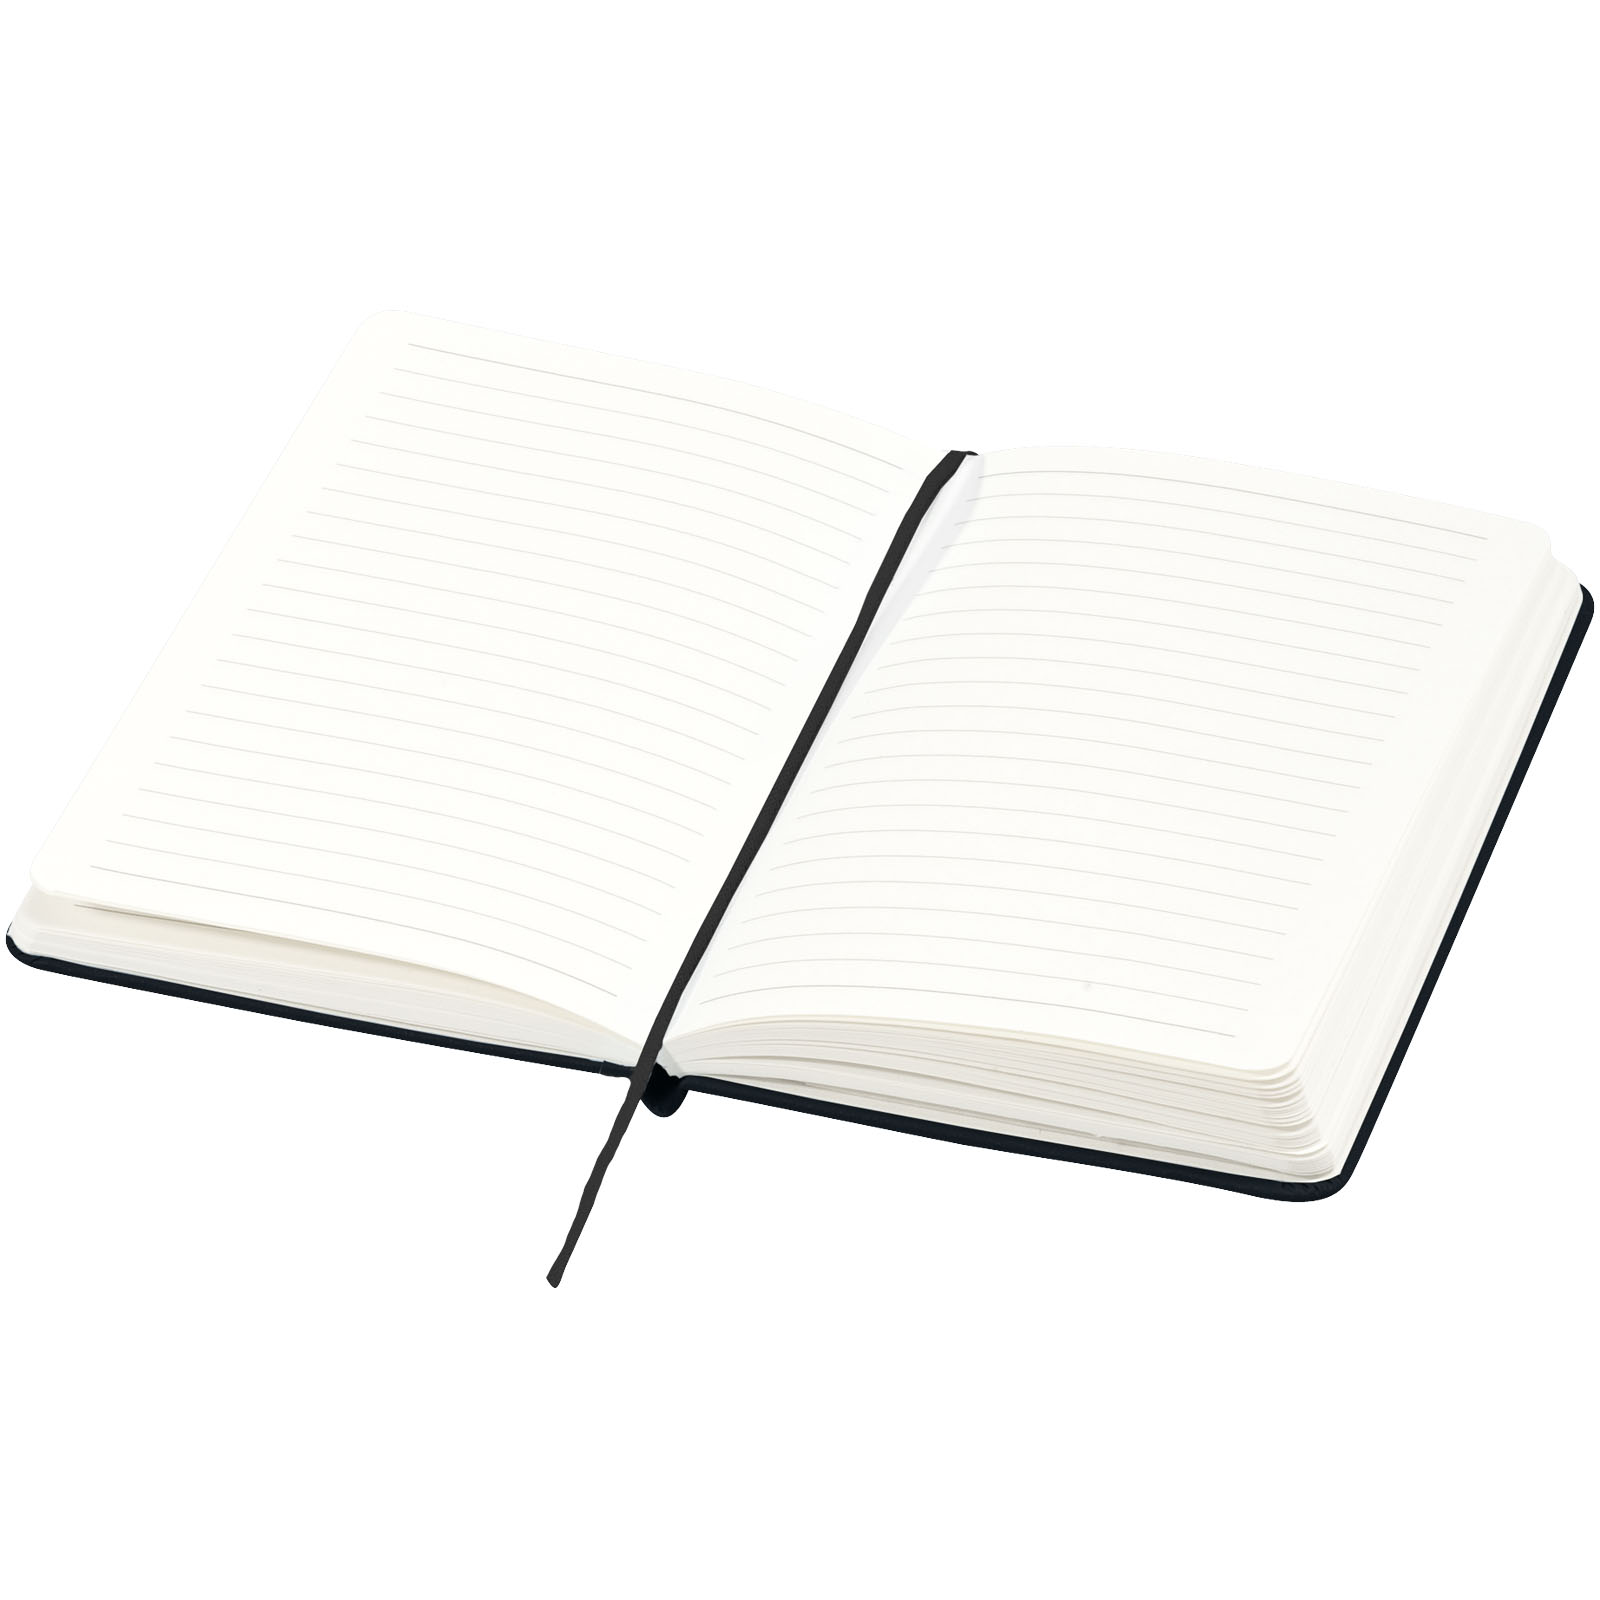 Advertising Hard cover notebooks - Executive A4 hard cover notebook - 4